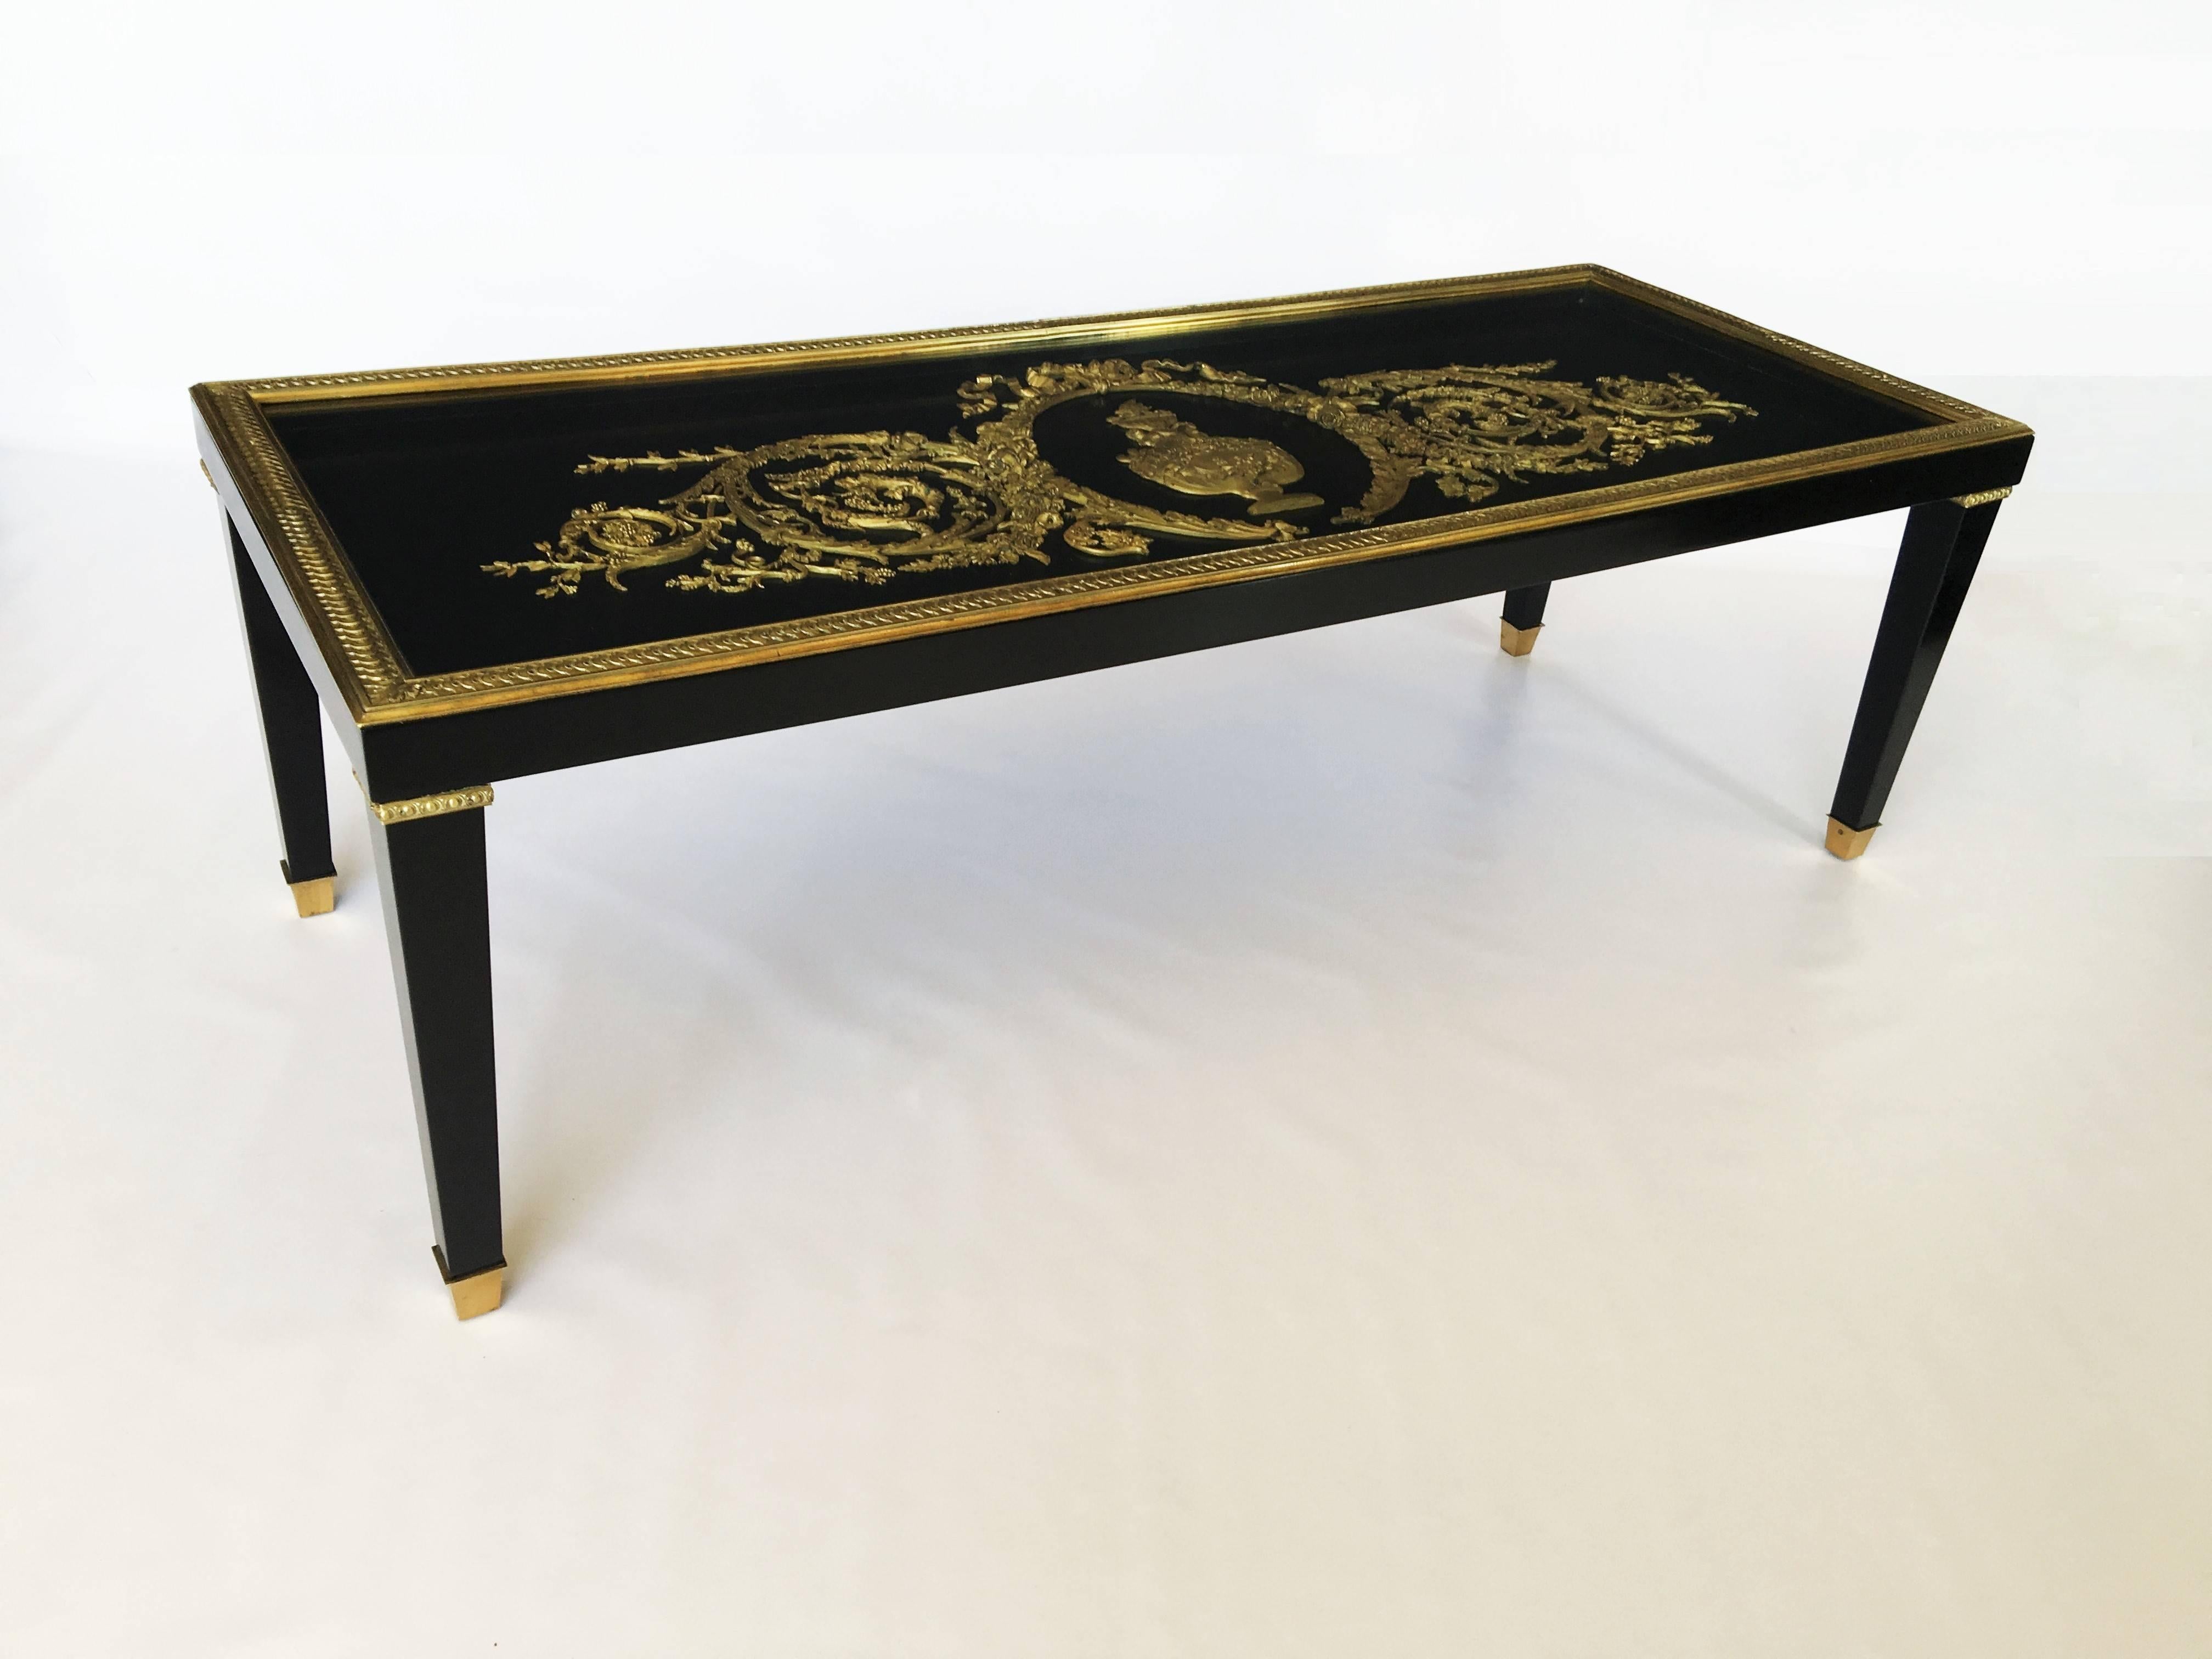 French Regency Ebonized, Glass and Gilt Mounted Centre Table Attributed to Beurdeley For Sale